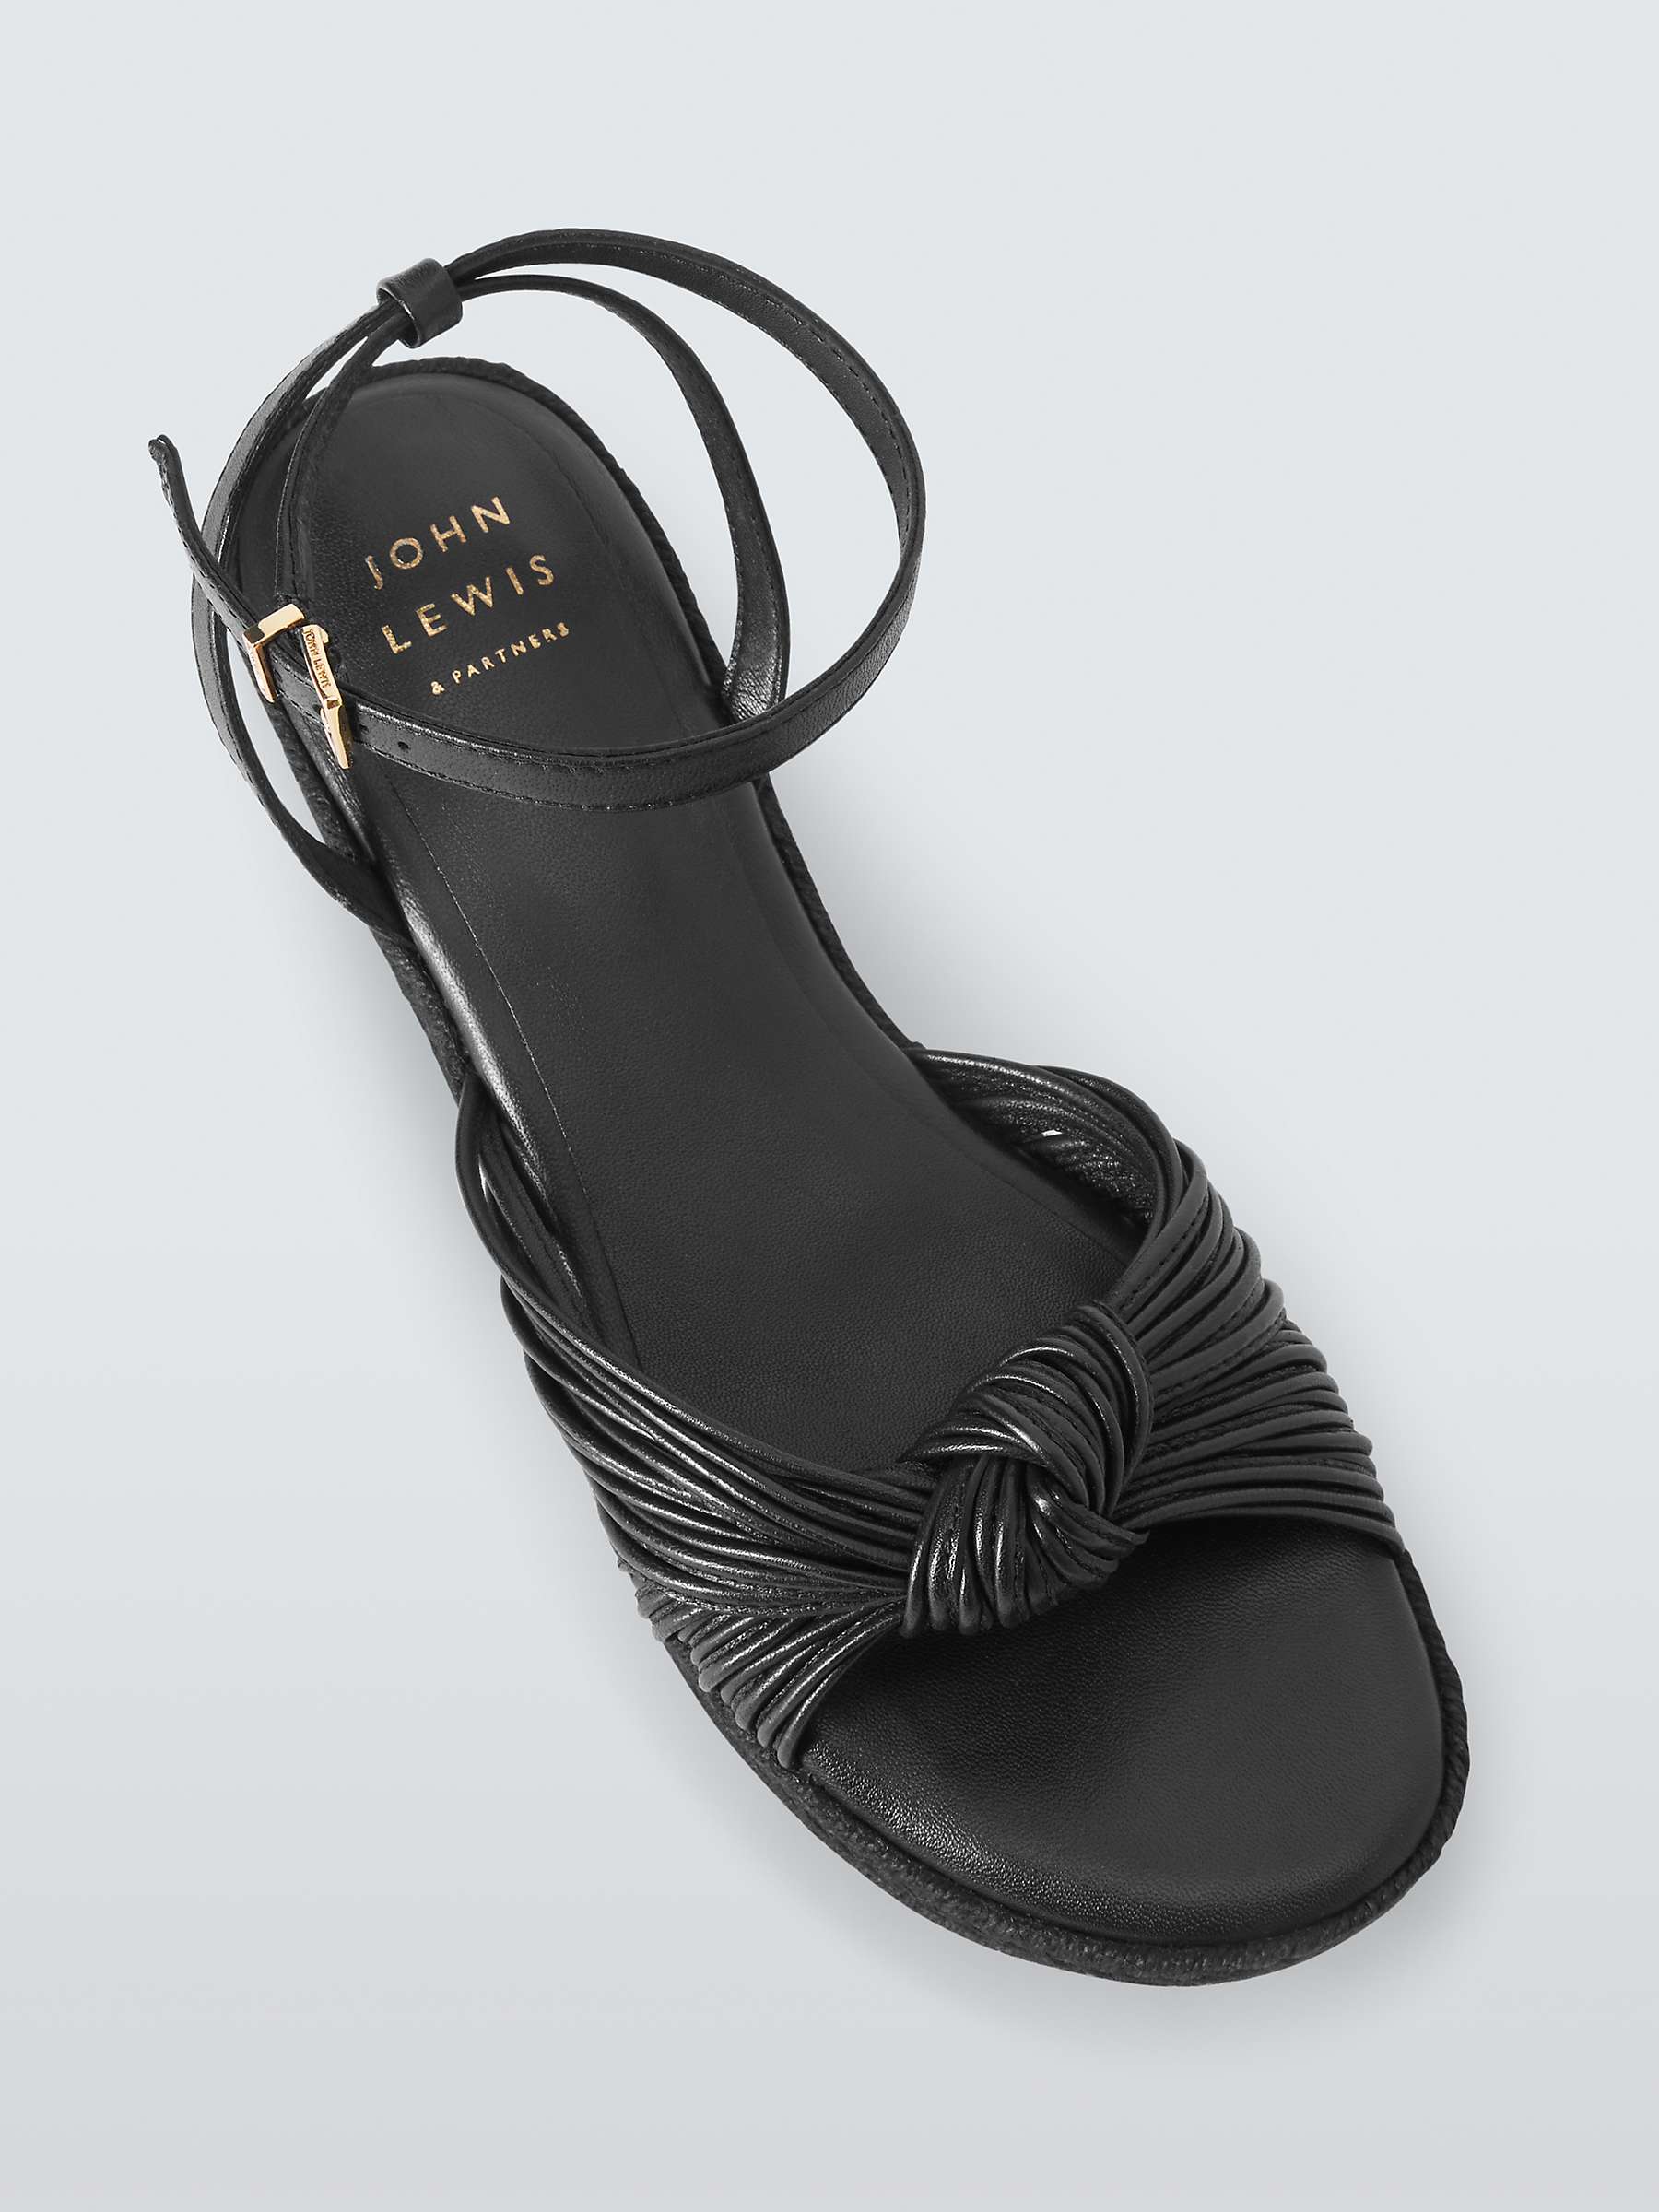 Buy John Lewis Kimi Leather Spaghetti Strap Knotted Wedge Sandals, Black Online at johnlewis.com